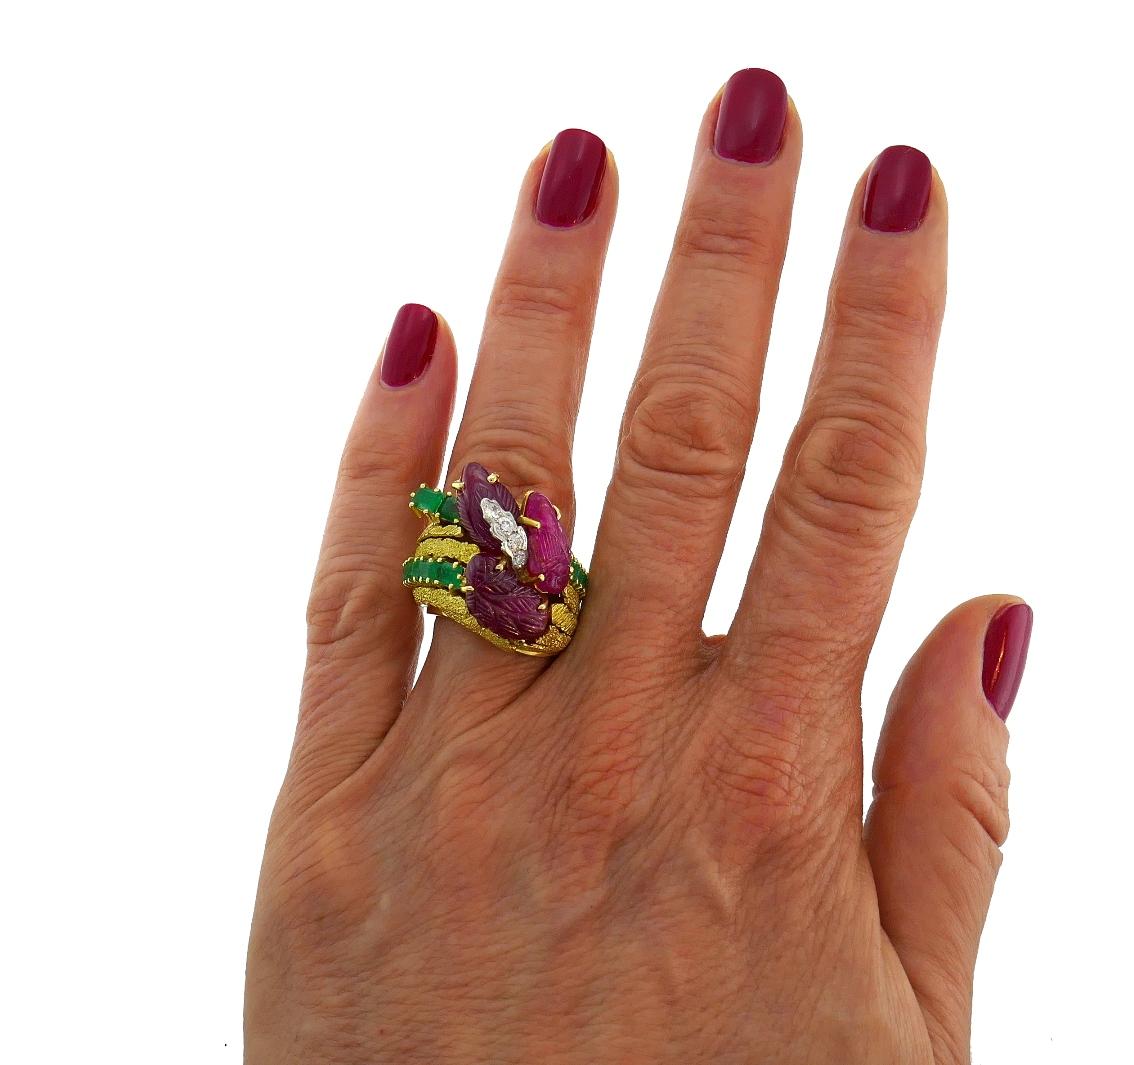 Colorful tutti-frutti motifs ring featuring four carved rubies set in 18 karat (tested) yellow gold and accented with transitional Old European cut diamonds (G-H color, VS clarity, 0.20 carat approximate total weight) and step cut emeralds (0.75